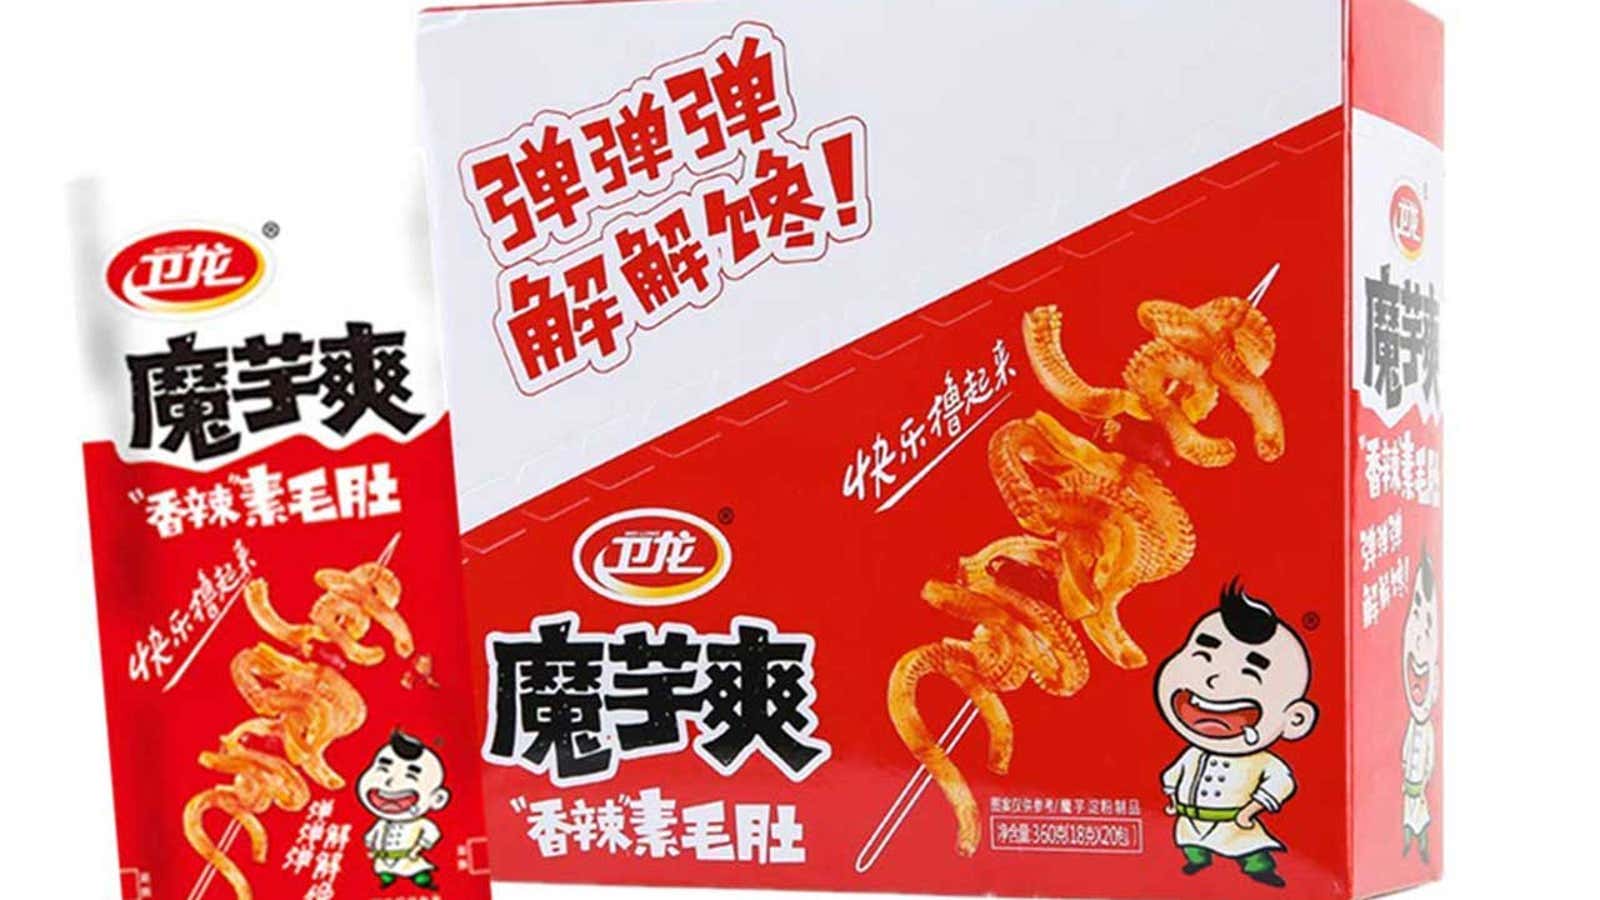 Daily Brief：菓子メーカーの巨大IPO